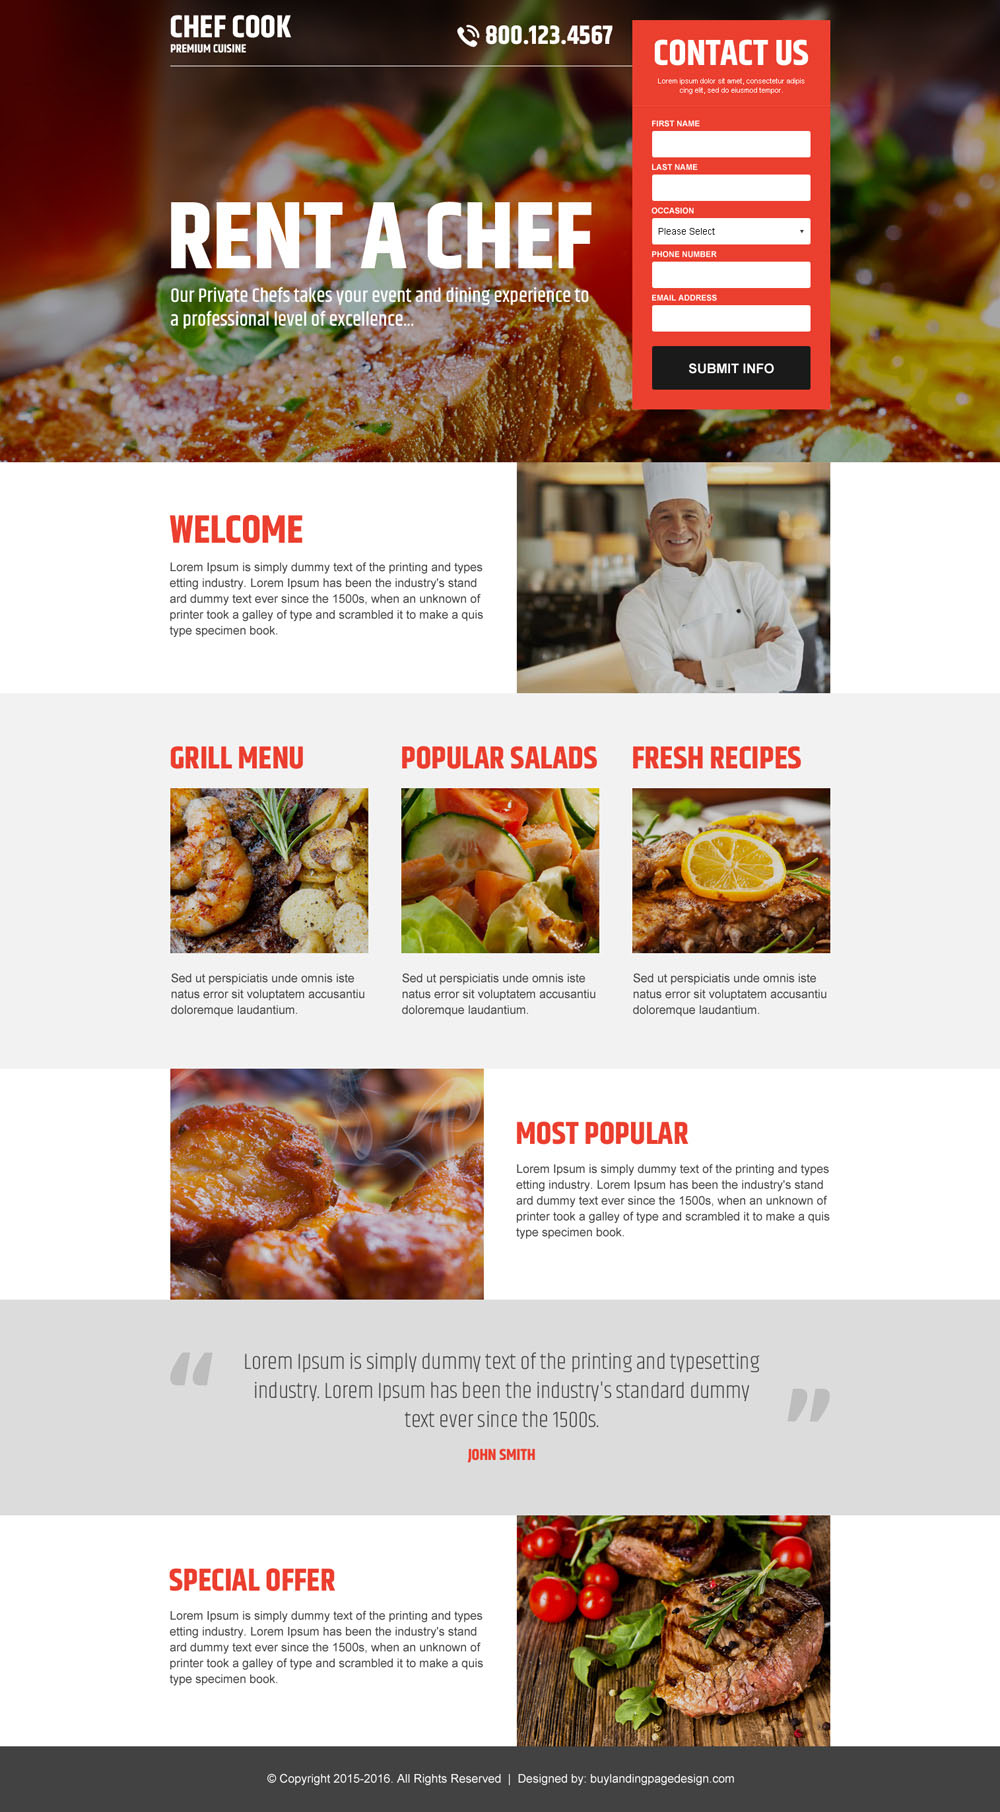 best-chef-cook-lead-capture-converting-landing-page-design-template-001